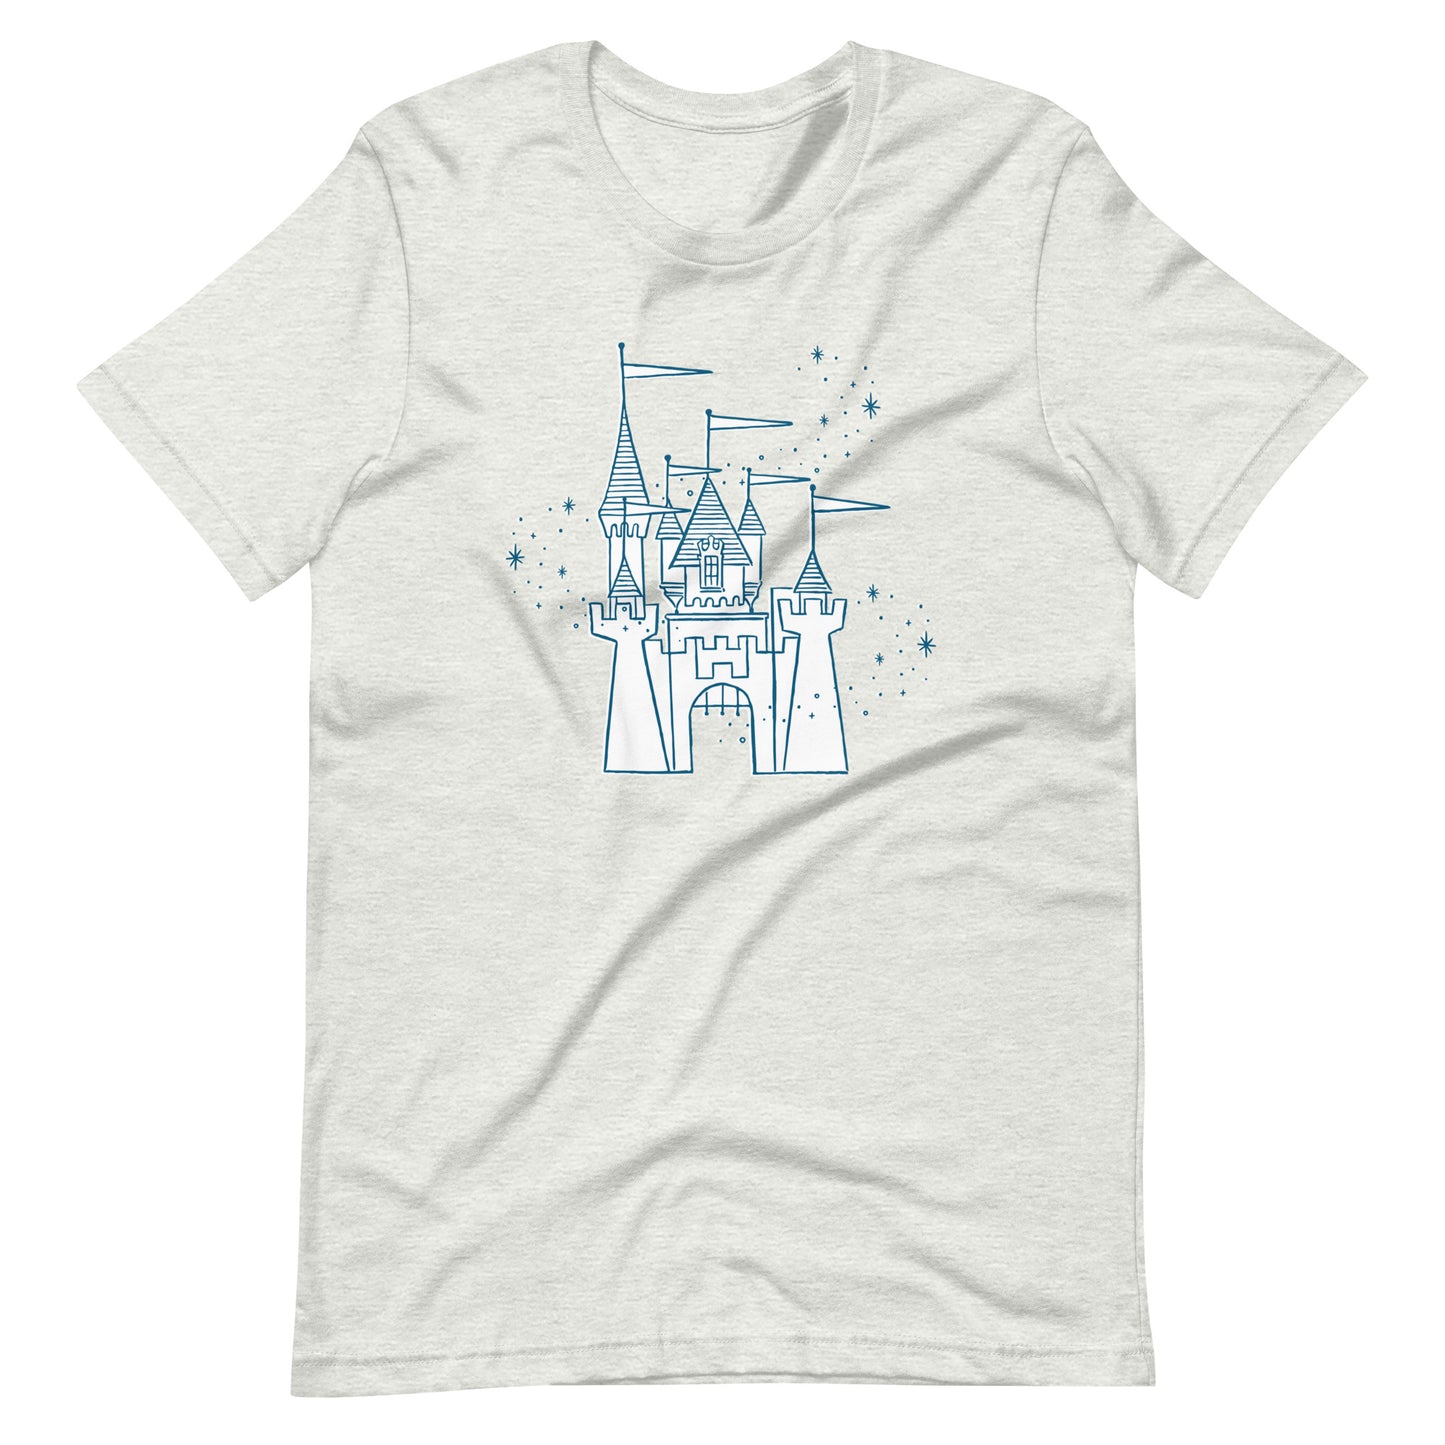 Heather ash colored shirt printed with vintage style sketch of the Disneyland Castle and pixie dust above the castle.